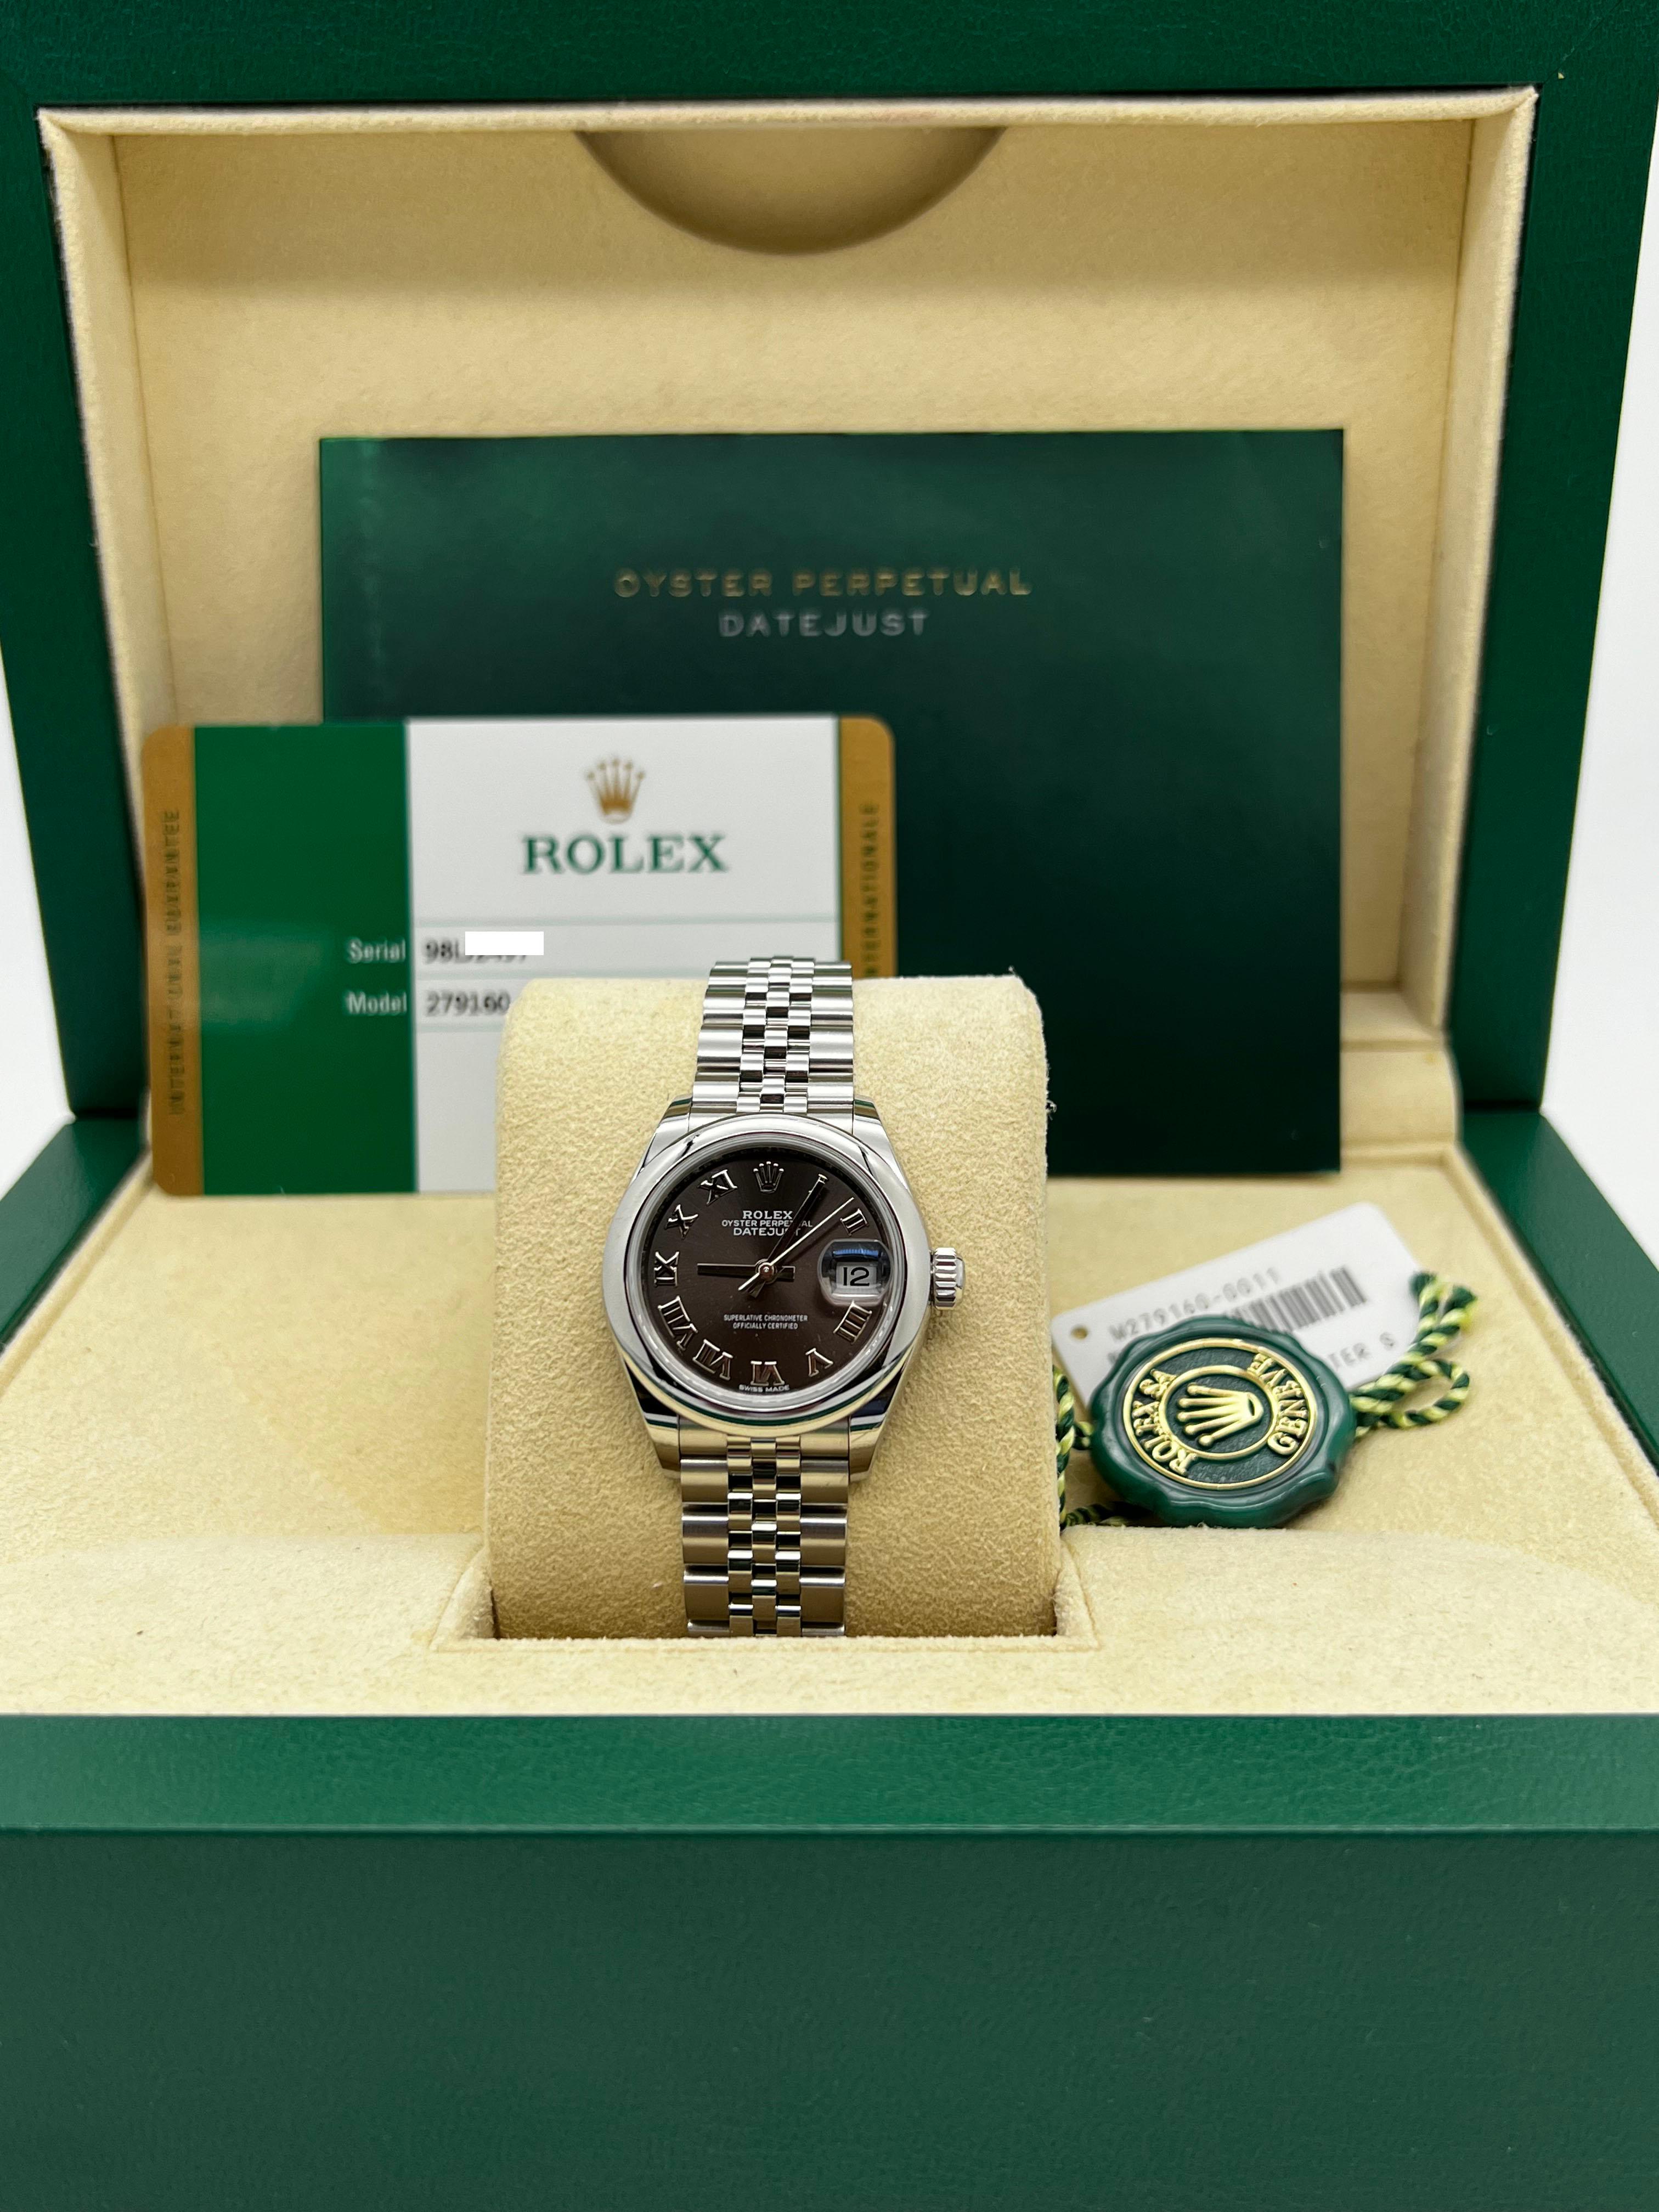 Style Number: 279160



Serial: 98LJ2***



Year: 2020

 

Model: Ladies Datejust 28mm

 

Case Material: Stainless Steel 

 

Band: Stainless Steel 

 

Bezel: Stainless Steel  Smooth Bezel 

 

Dial: Dark Grey 

 

Face: Sapphire Crystal 

 

Case